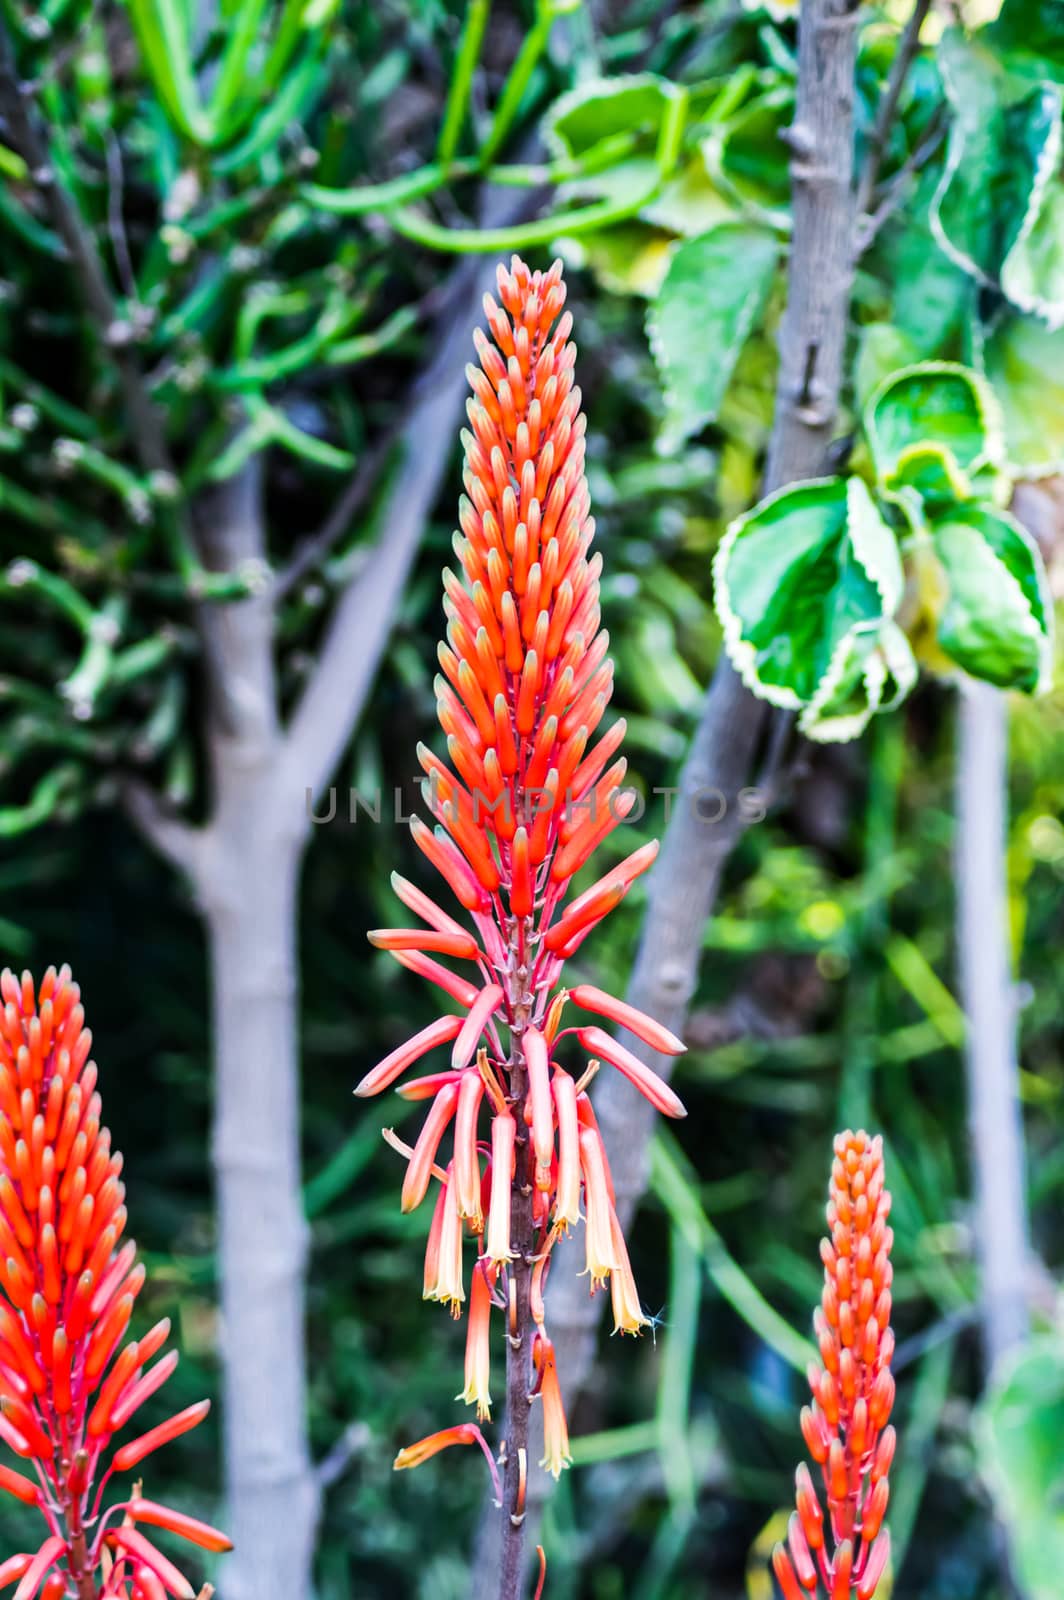 The Aloe plant is known for its medical properties,  by Philou1000